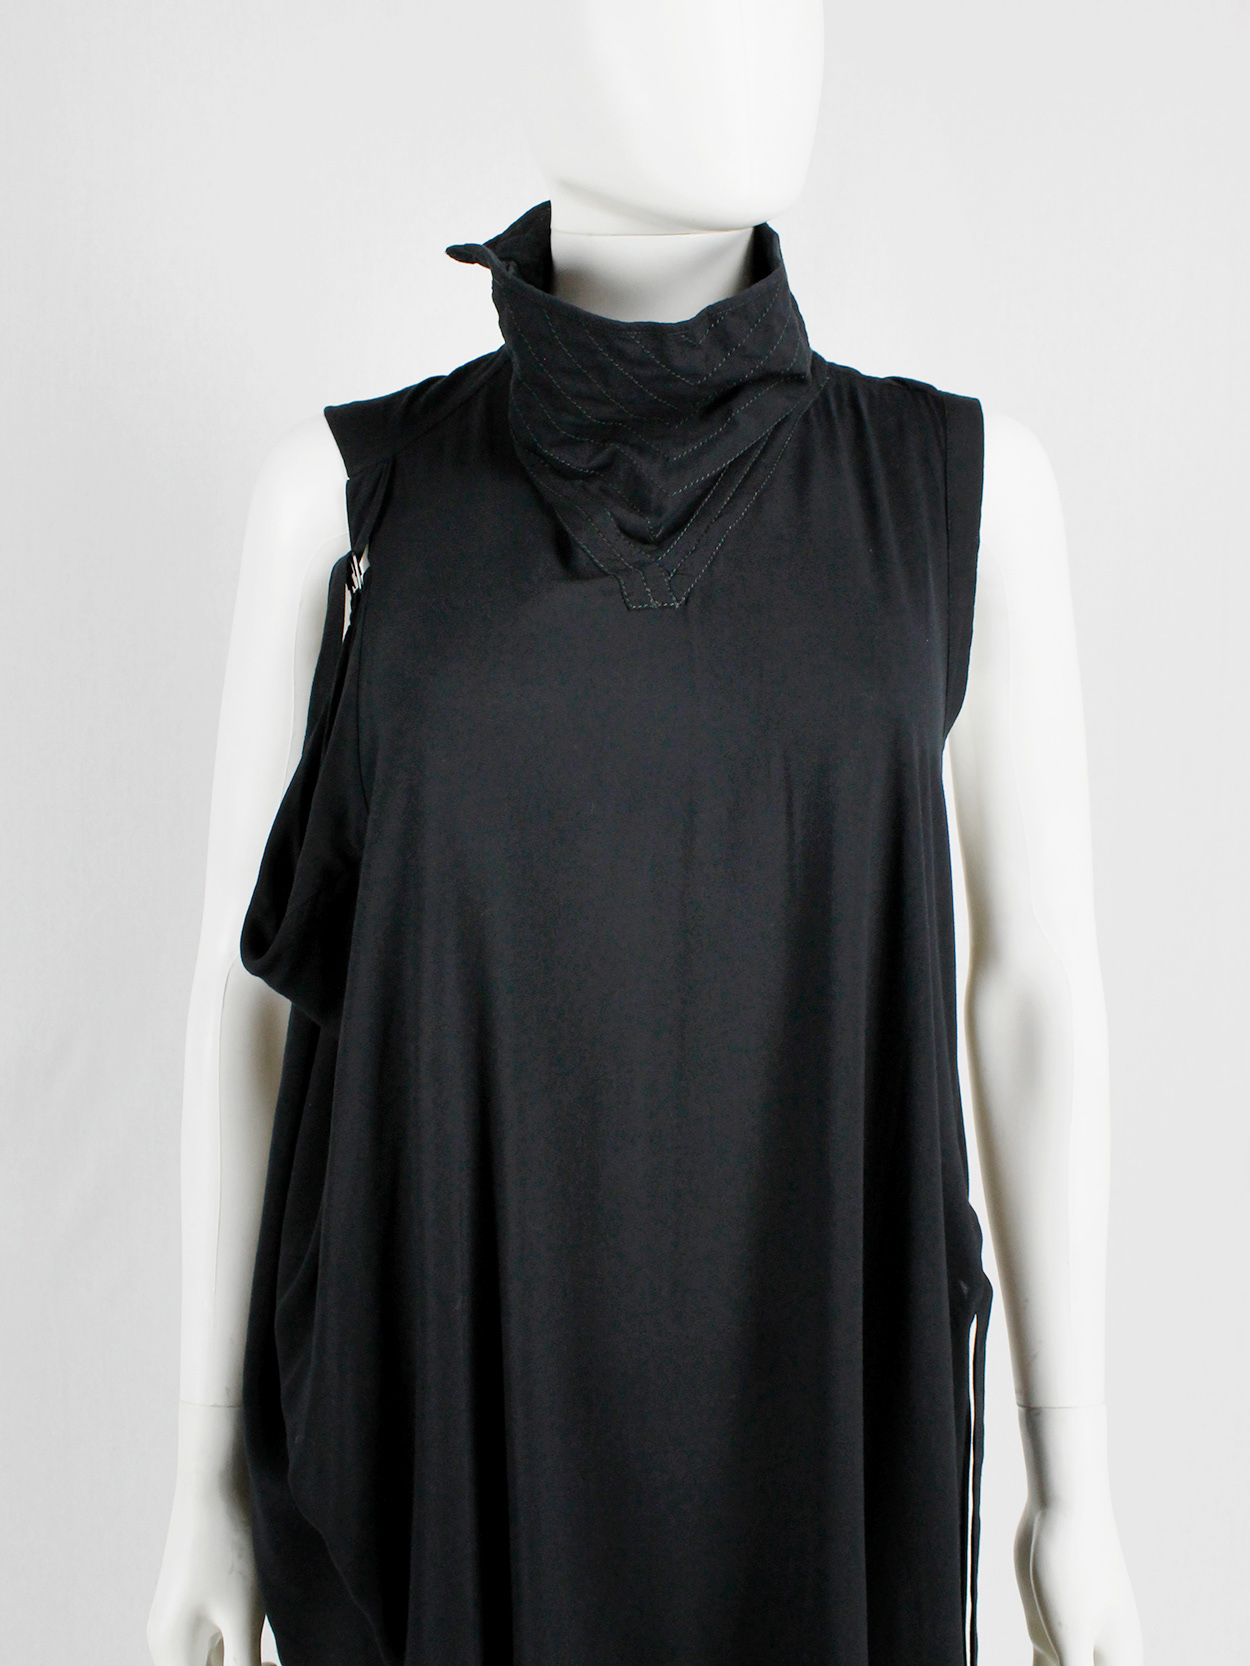 vaniitas Ann Demeulemeester black dress with straps and stitched collar spring 2010 (1)